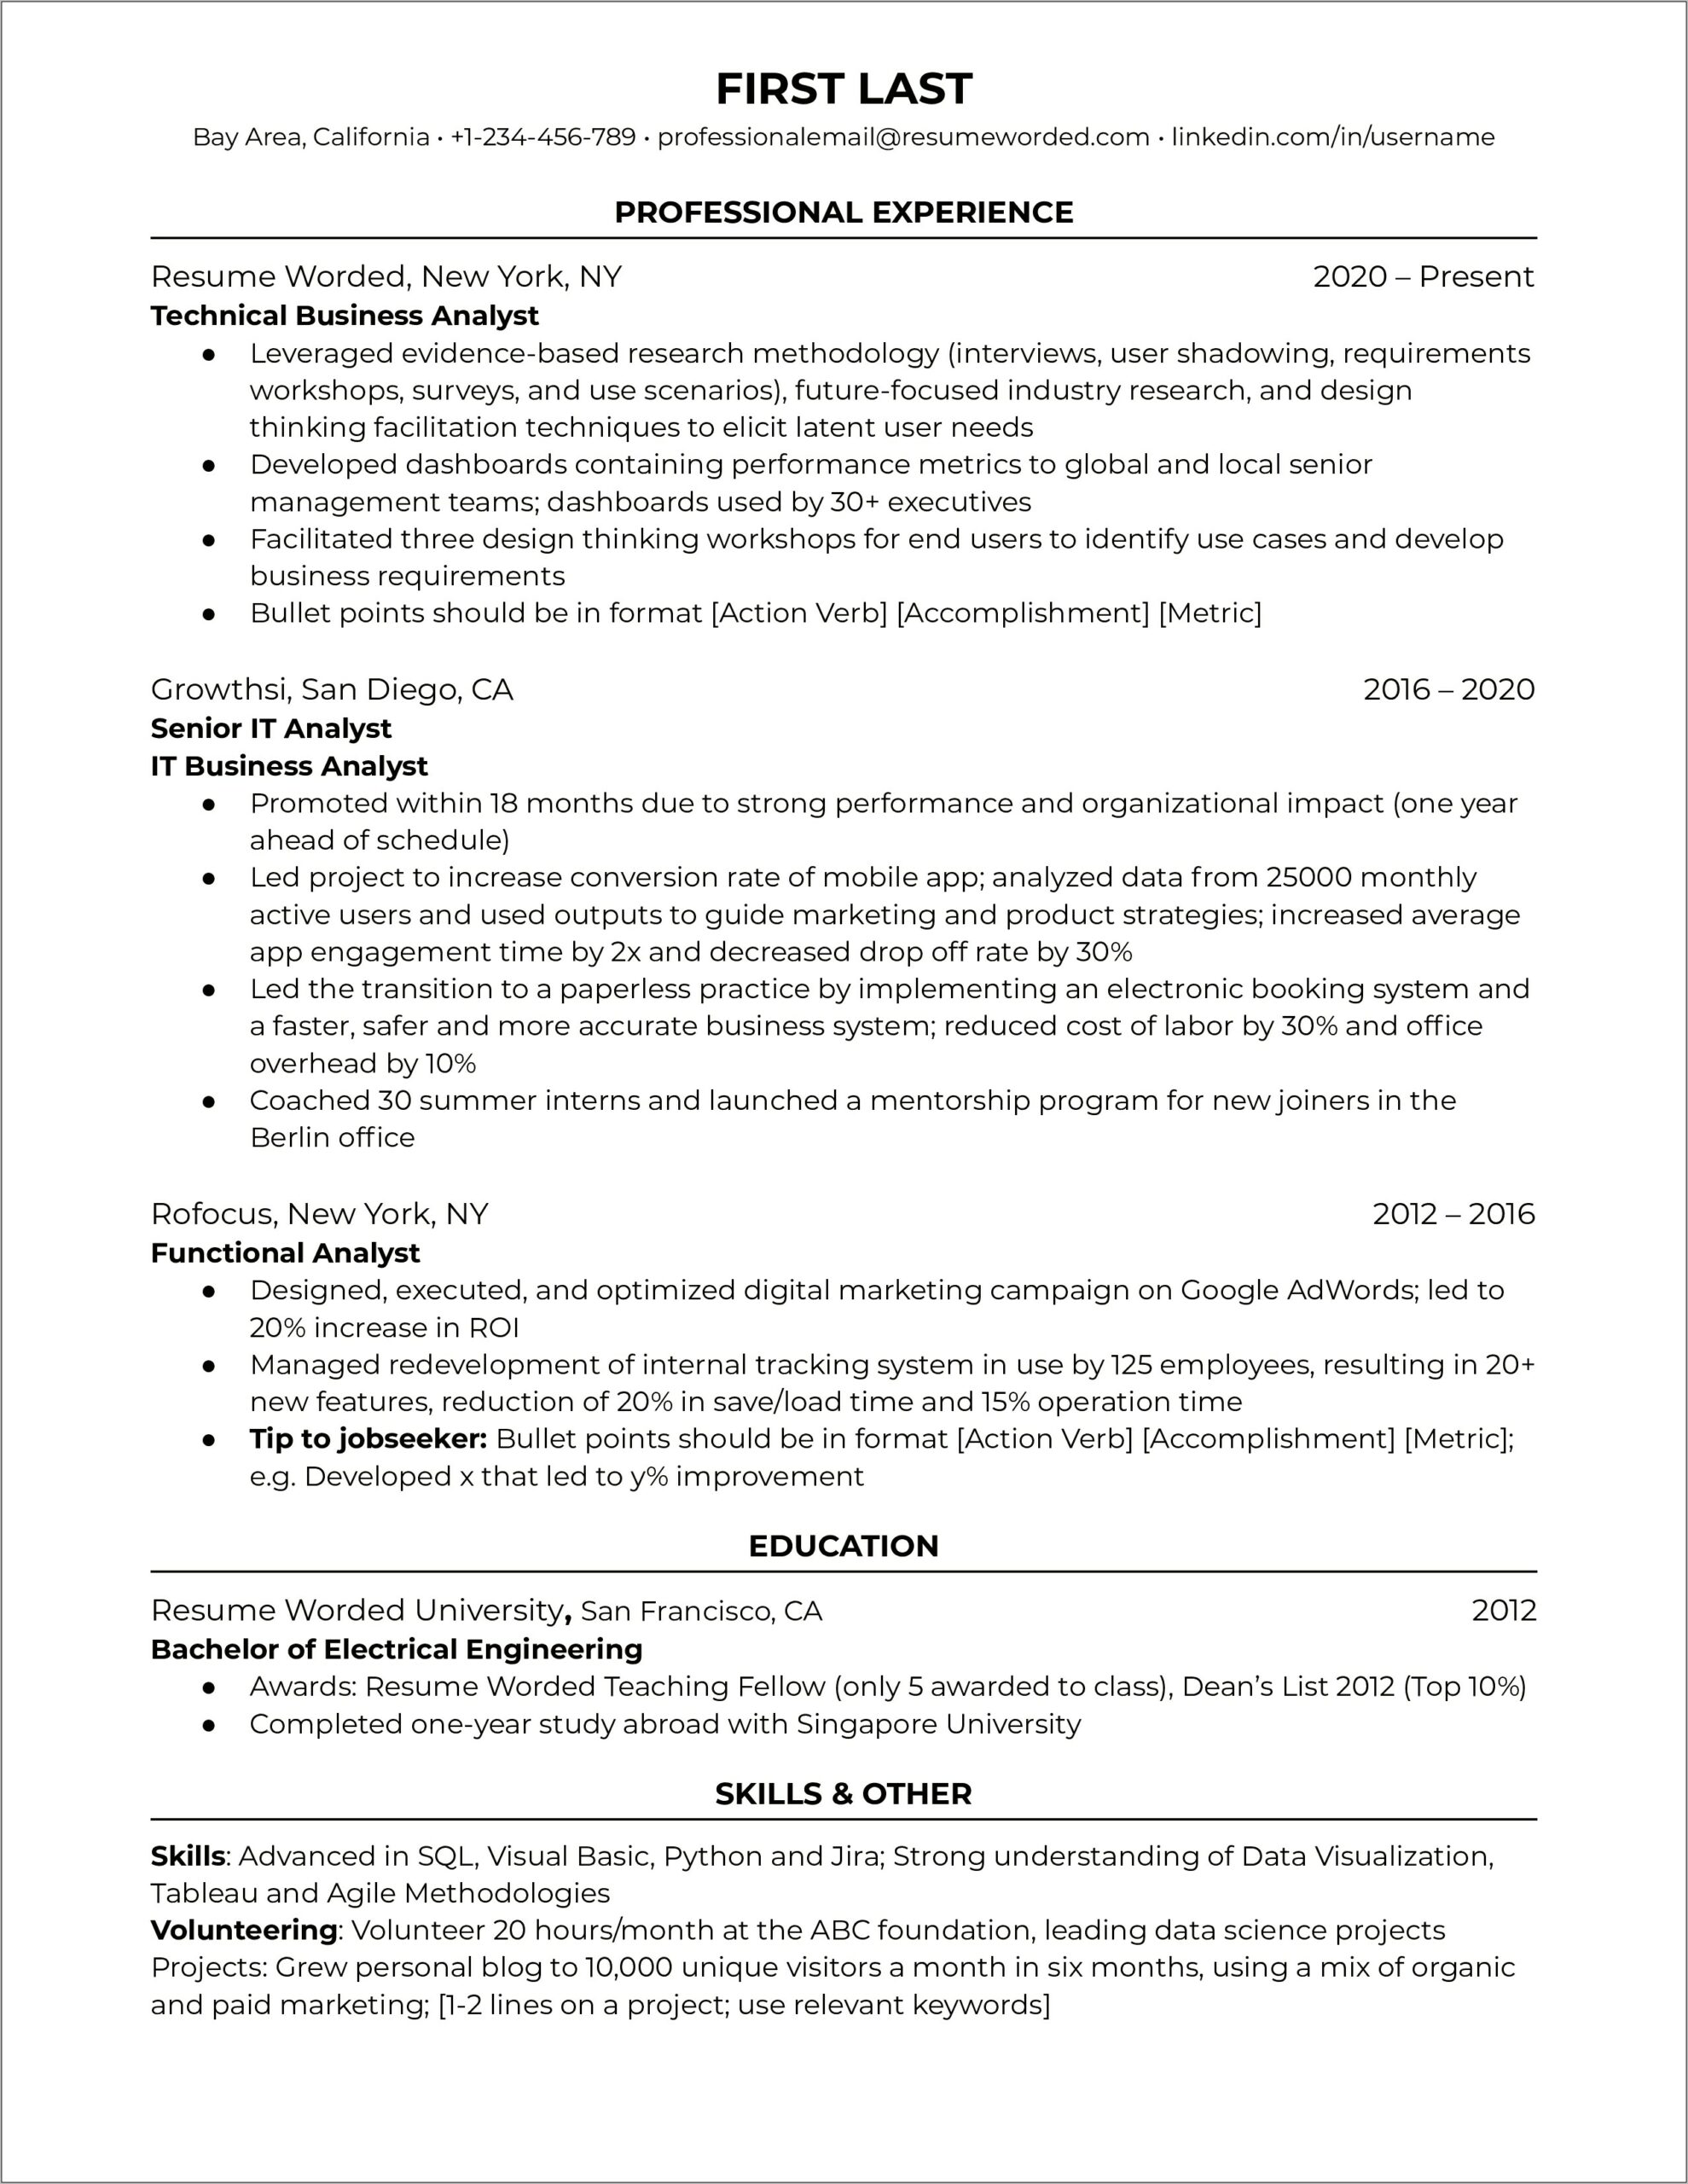 Business Analysis Manager Resume Sample